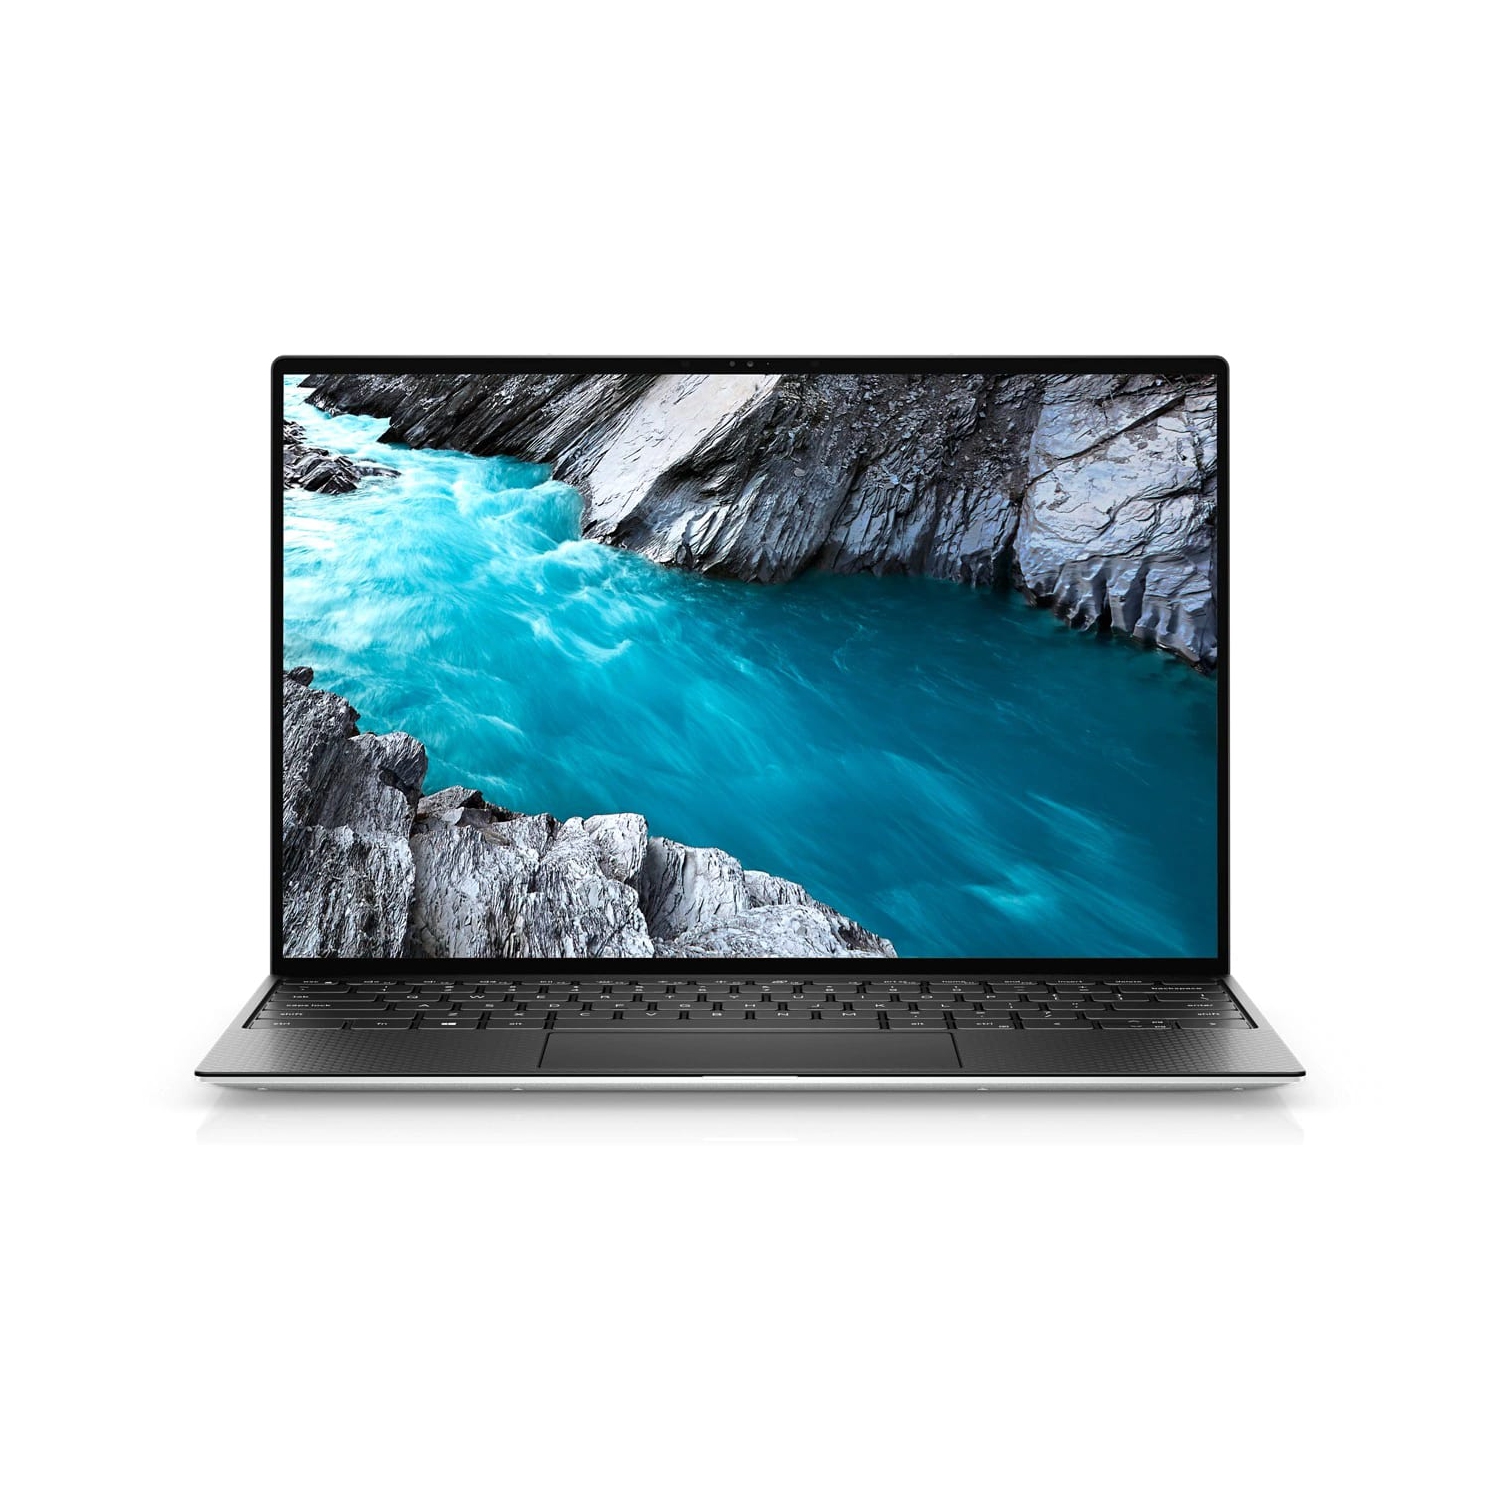 Refurbished (Excellent) - Dell XPS 13 9310 Laptop (2020) | 13.4" FHD+ | Core i7 - 512GB SSD - 16GB RAM | 4 Cores @ 5 GHz - 11th Gen CPU Certified Refurbished